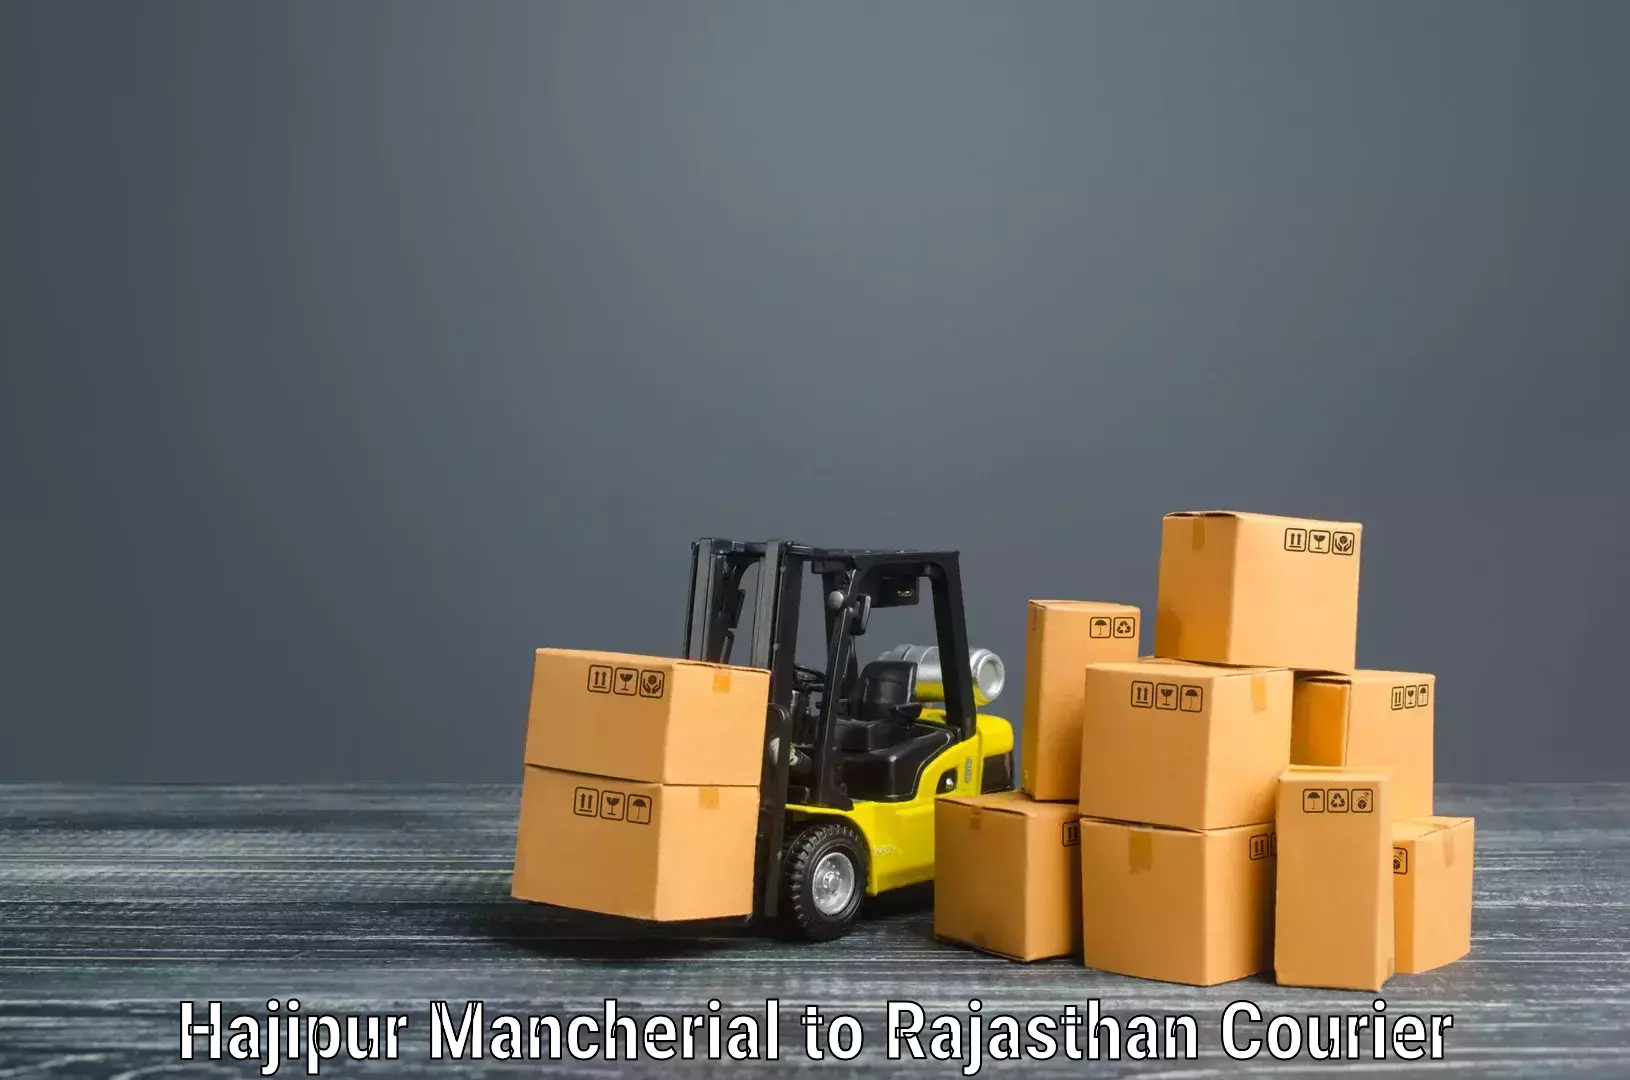 Quality moving services Hajipur Mancherial to Chittorgarh